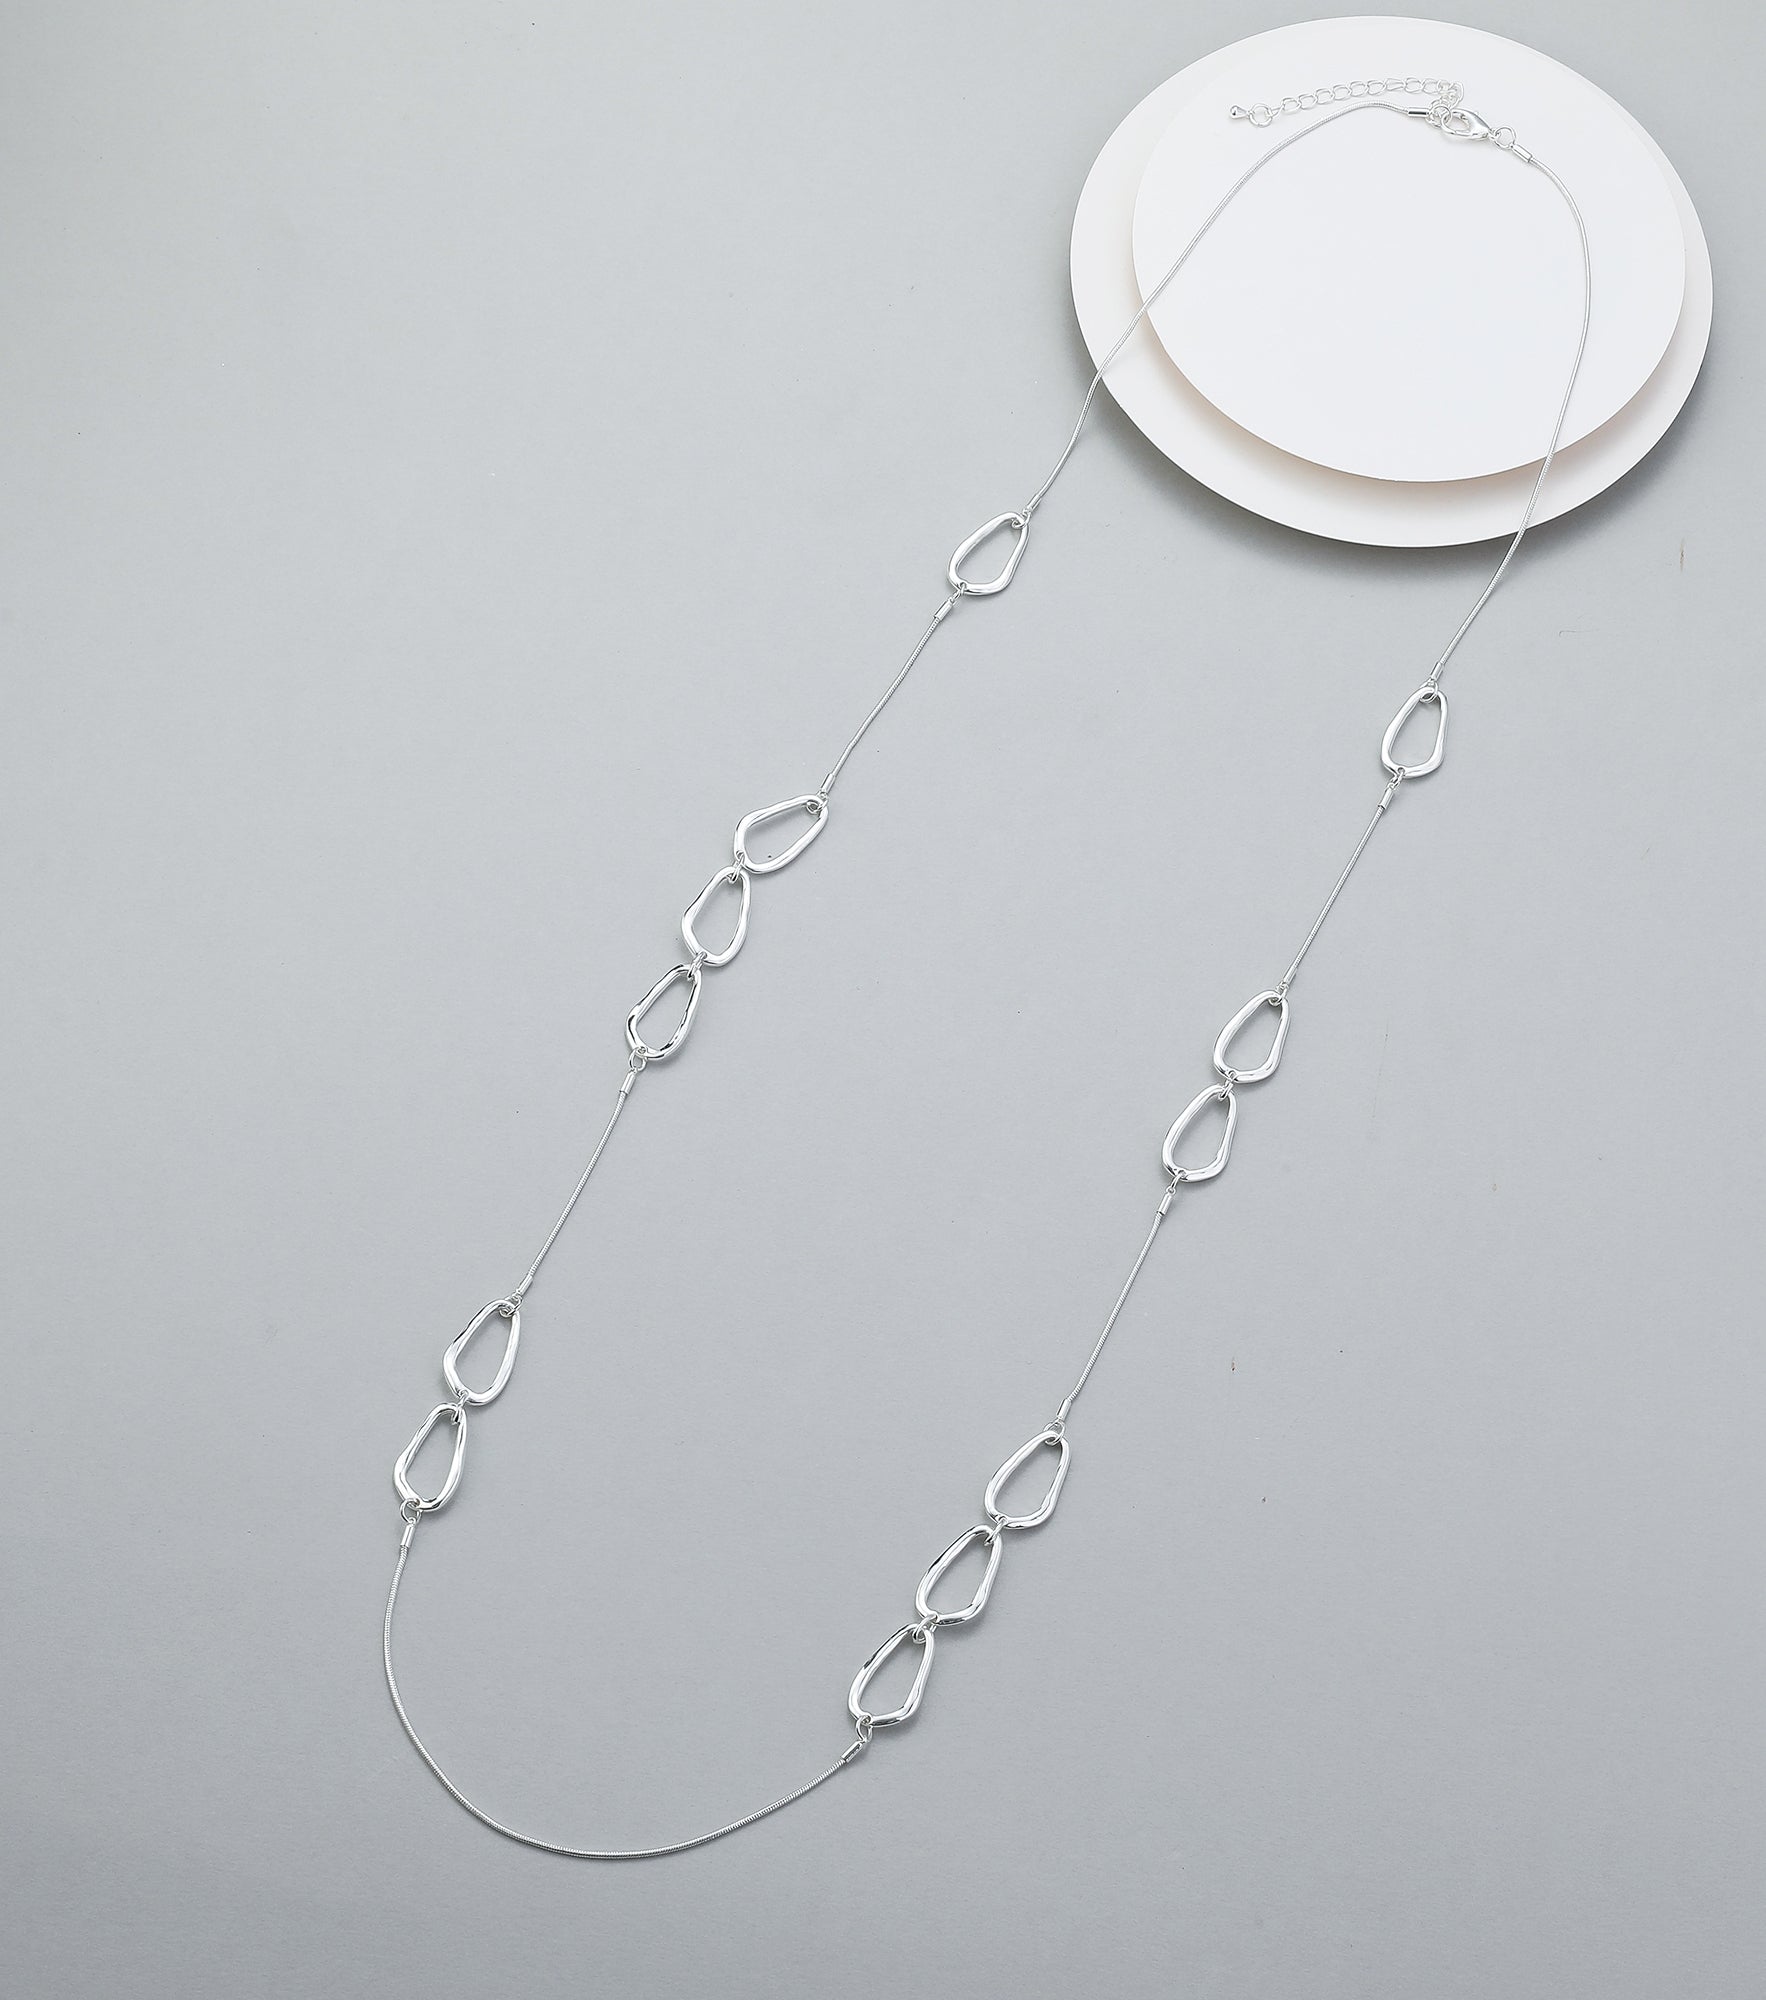 Long necklace, with interlinked silver open-oval stations - on a silver chain